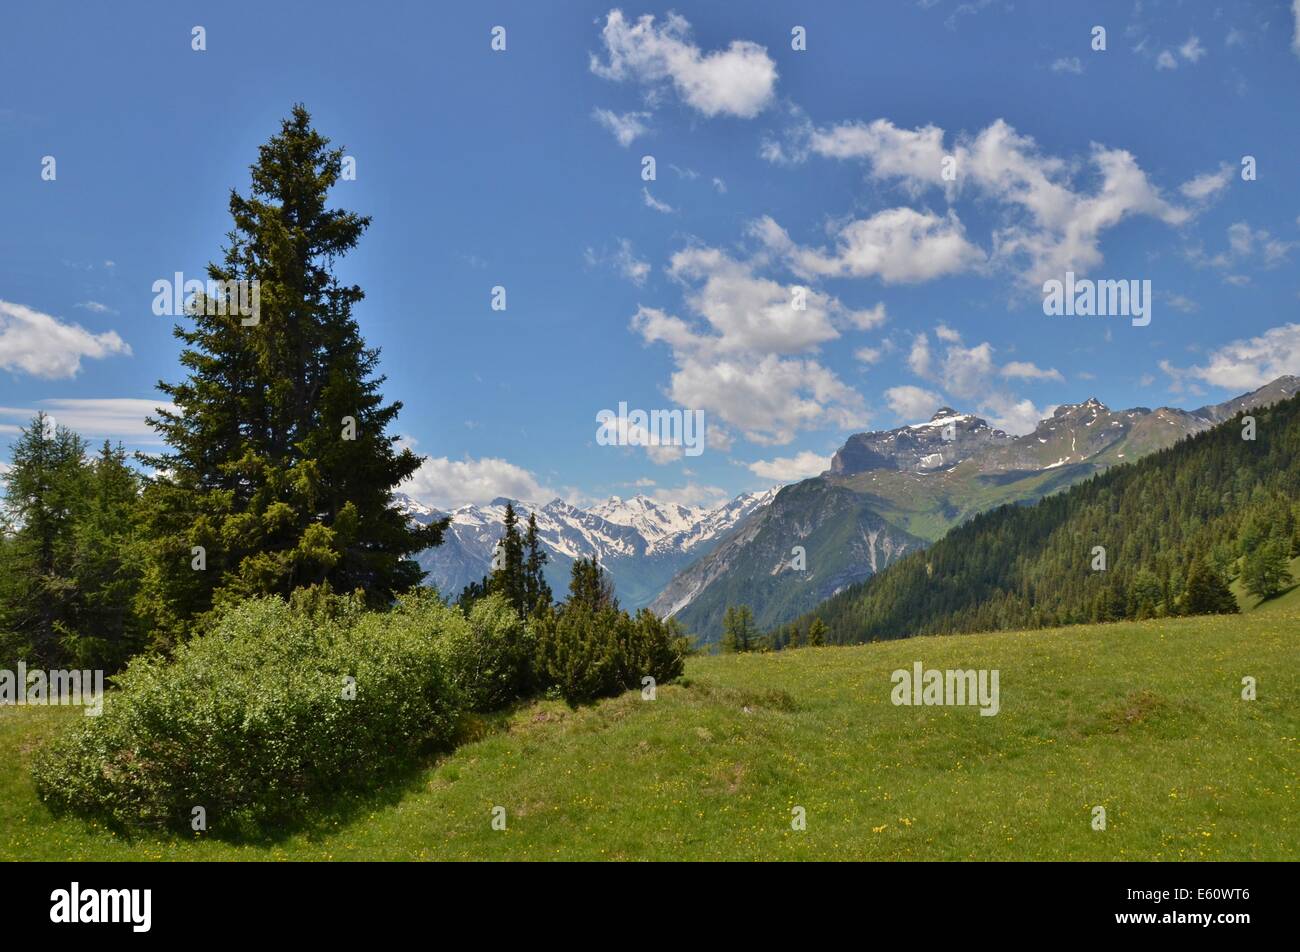 Gschnitz Valley, on the way to Blaser hut, Alpine meadows with lots of flowers, view to  Pitztal Stock Photo